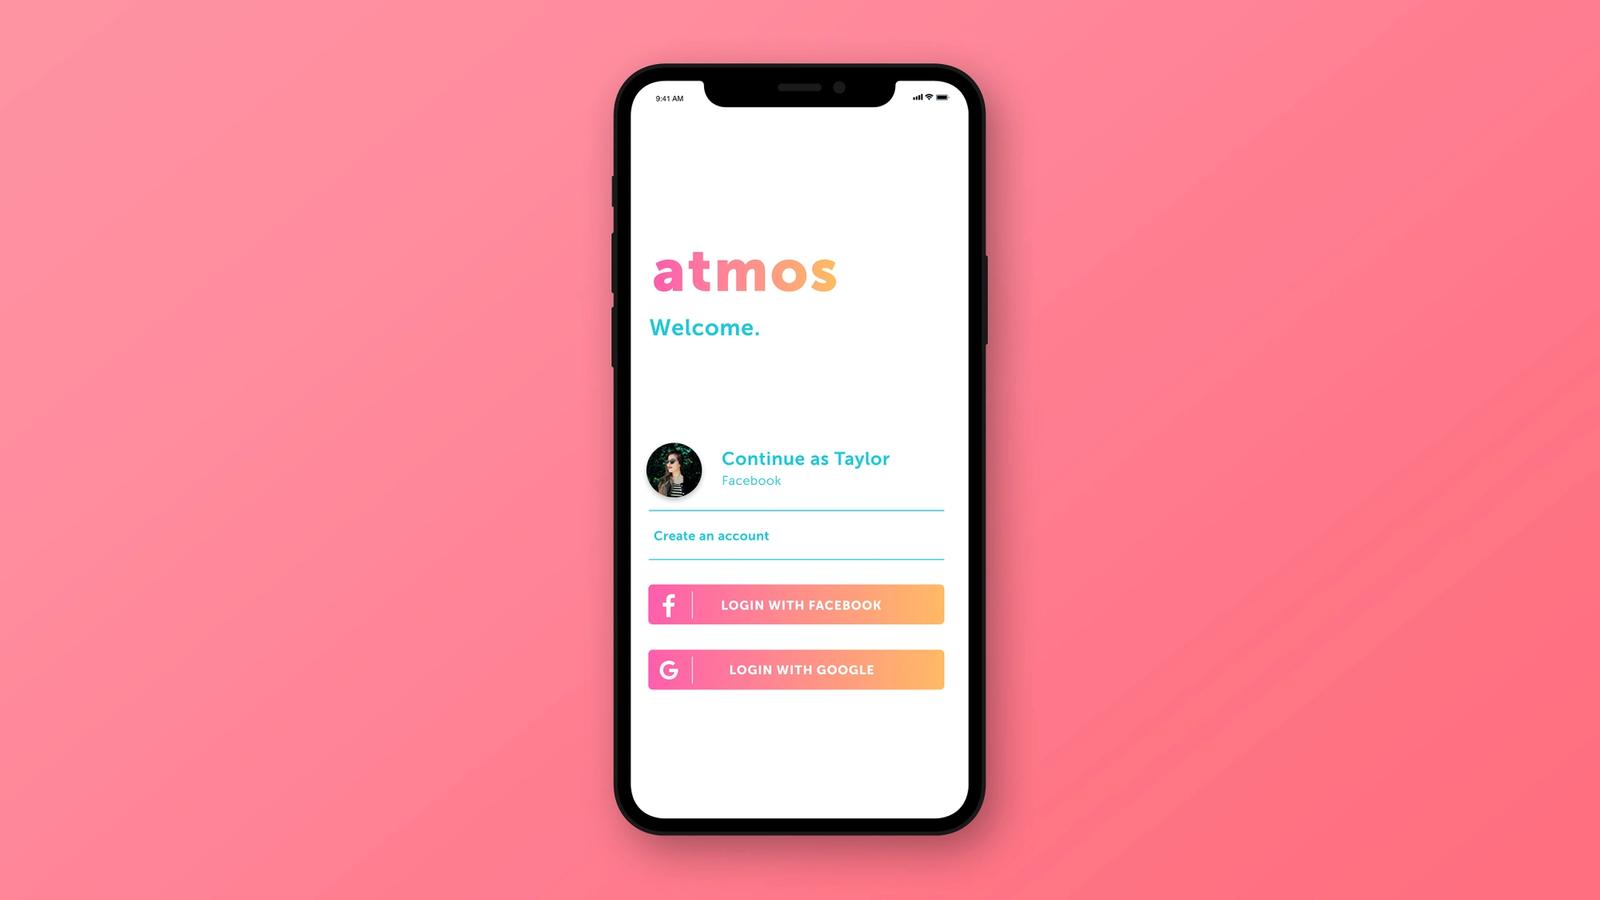 Atmos mobile application (MFA thesis project)